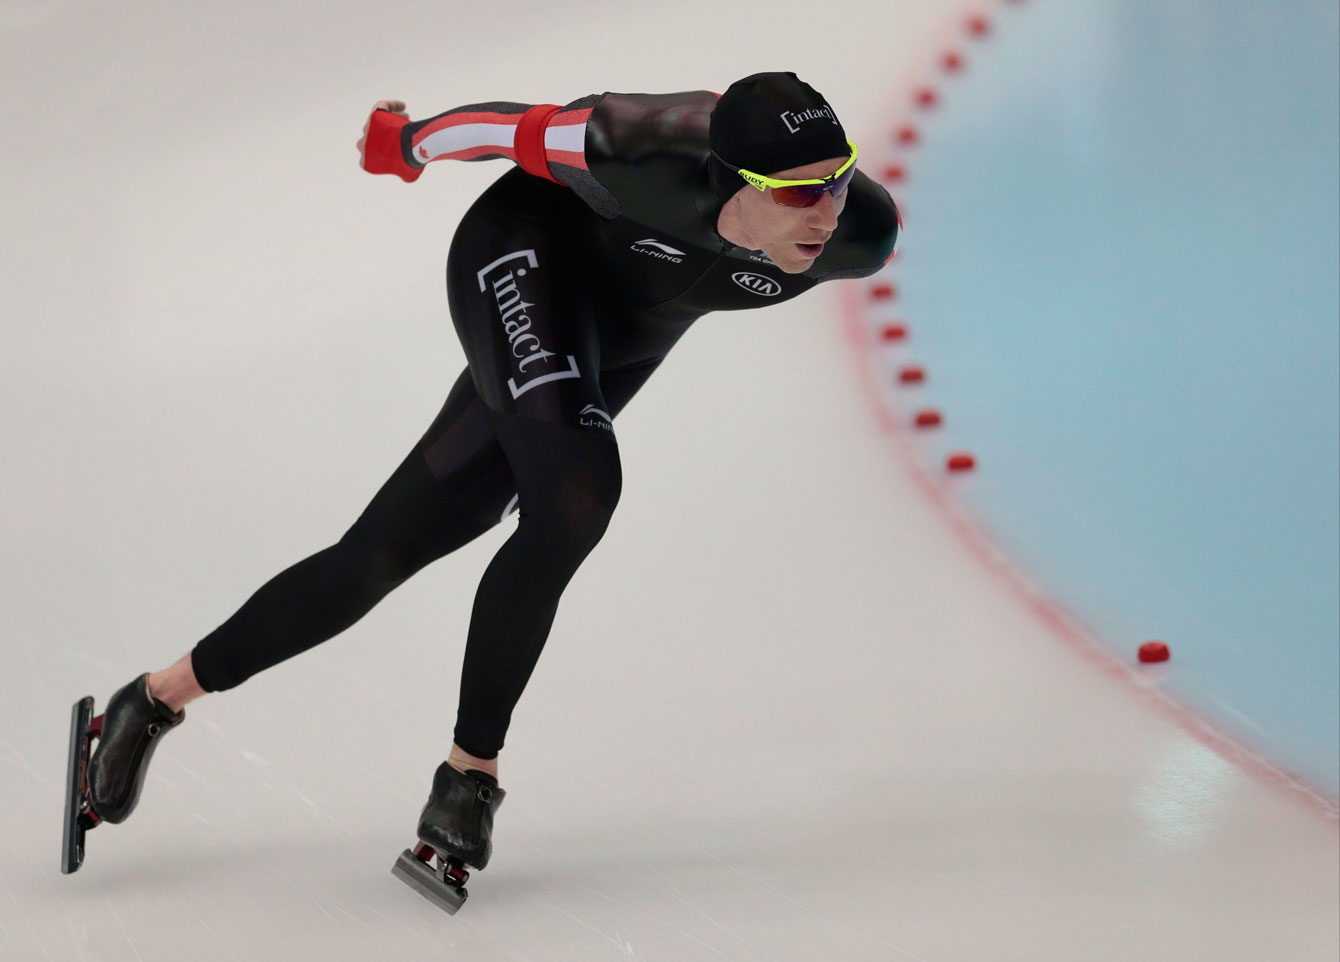 Ted-Jan Bloemen, of Canada, competes to take the silver at the men's 10,000 metres of the World Single Distances Speed Skating Championships in Kolomna, Russia, on Thursday, Feb. 11, 2016. (AP Photo/Ivan Sekretarev)